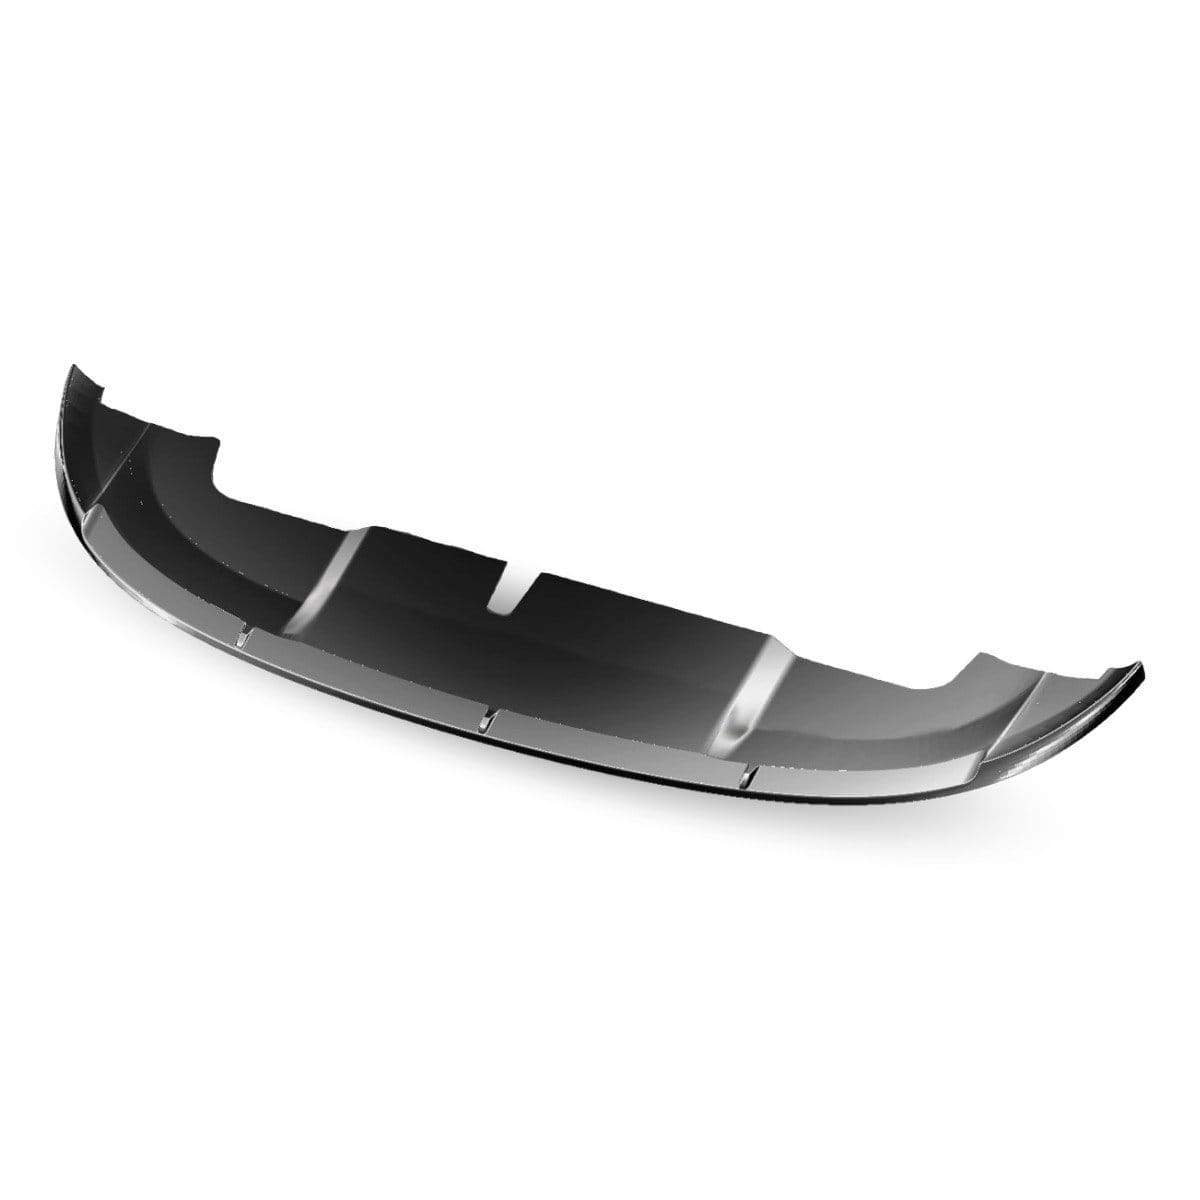 ACS Composite Cavallino Front Lip Splitter for Fiat 500 Abarth [40-4-021]SBK - Enhance airflow, handling, and aesthetics with this high-quality, easy-to-install front splitter.